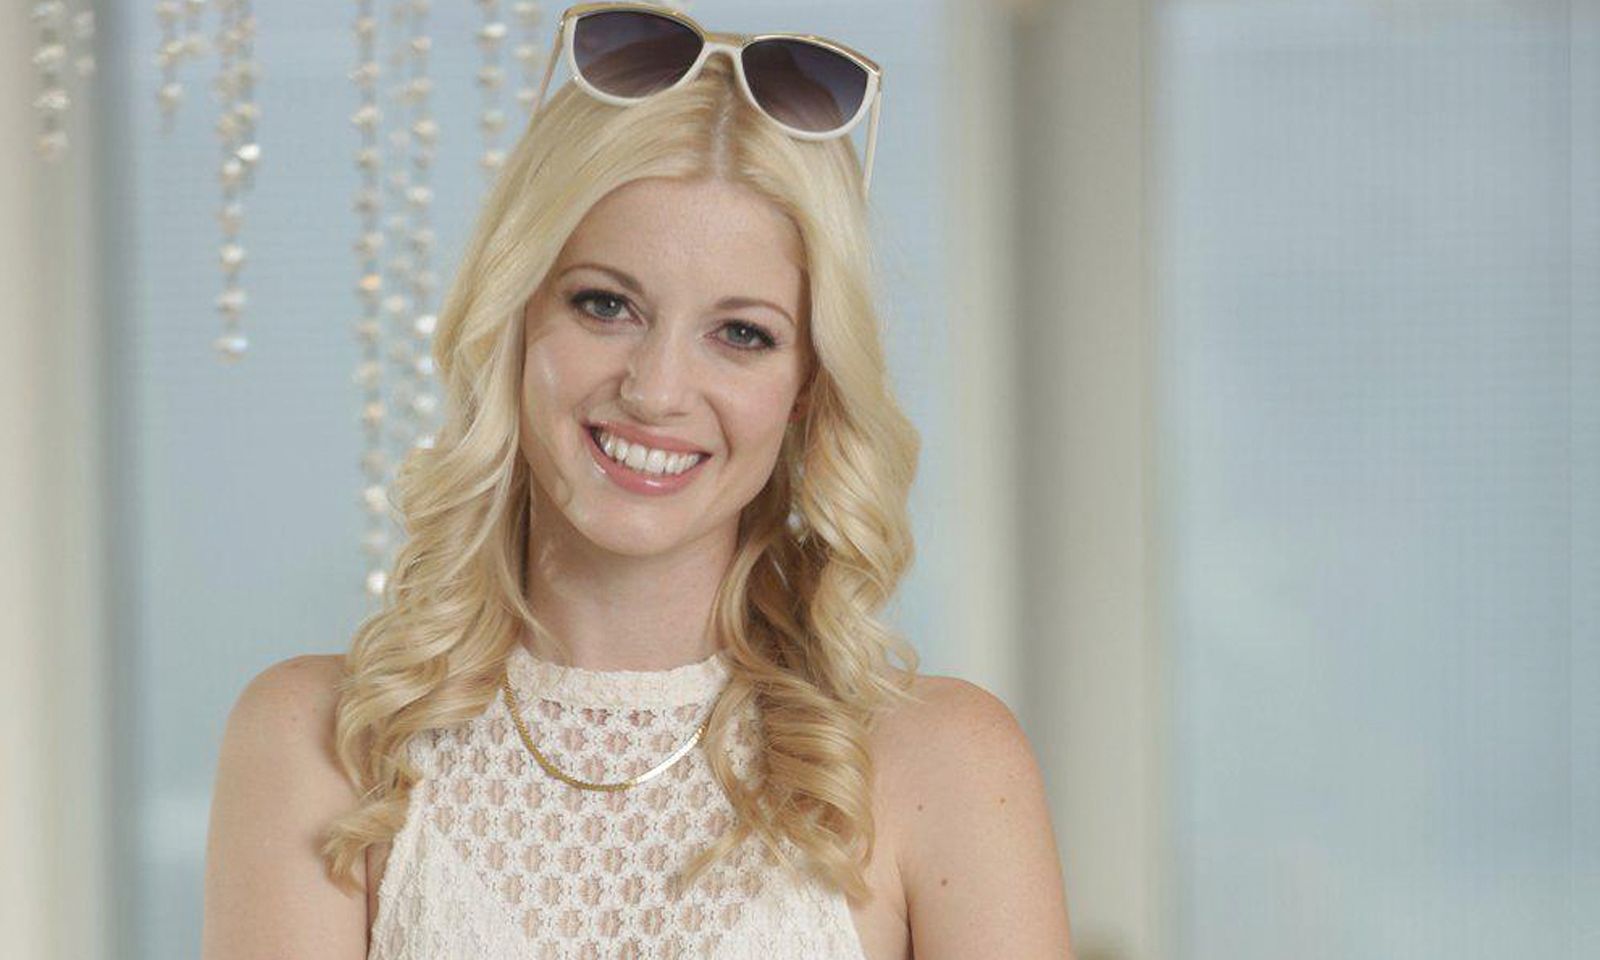 Charlotte Stokely Lands Cover of Latest Issue of Penthouse Letter